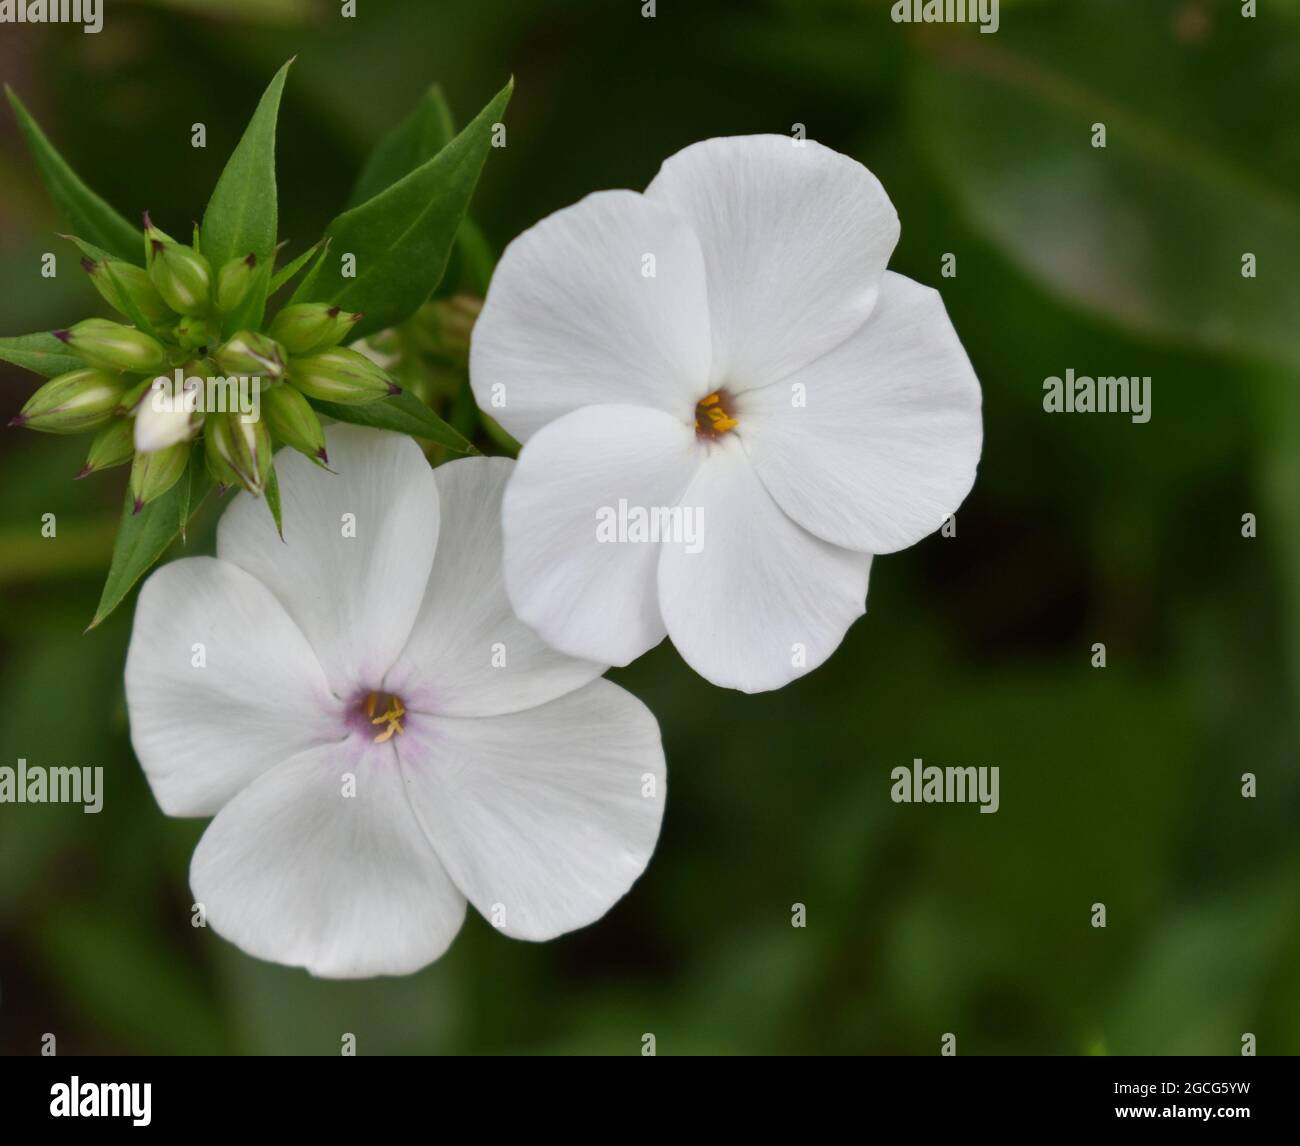 Two white Phlox flowers and buds. Stock Photo